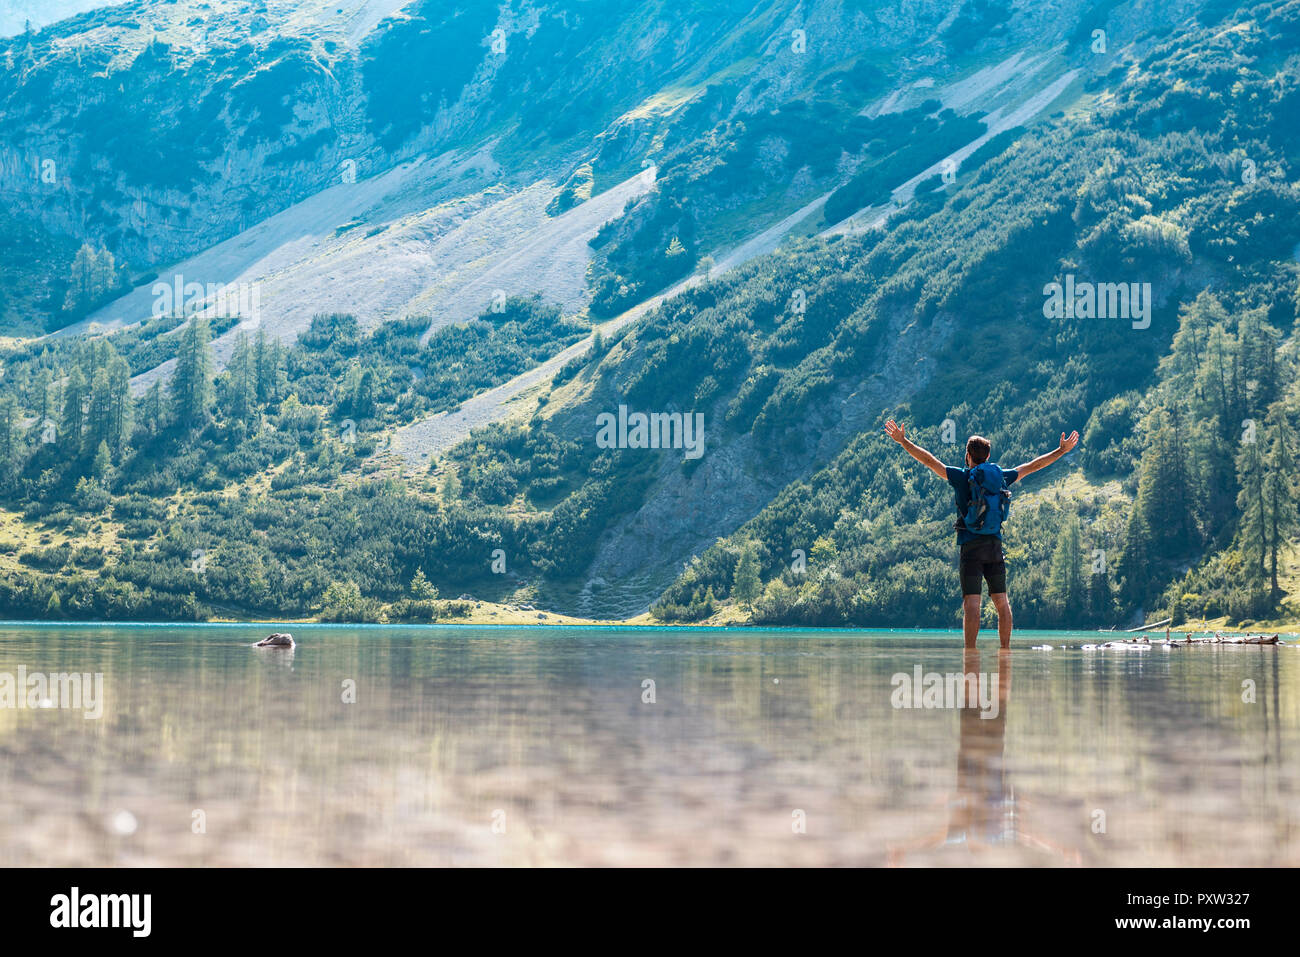 Austria, Tyrol, Hiker at Lake Seebensee standing ankle deep in water, with raised arms Stock Photo